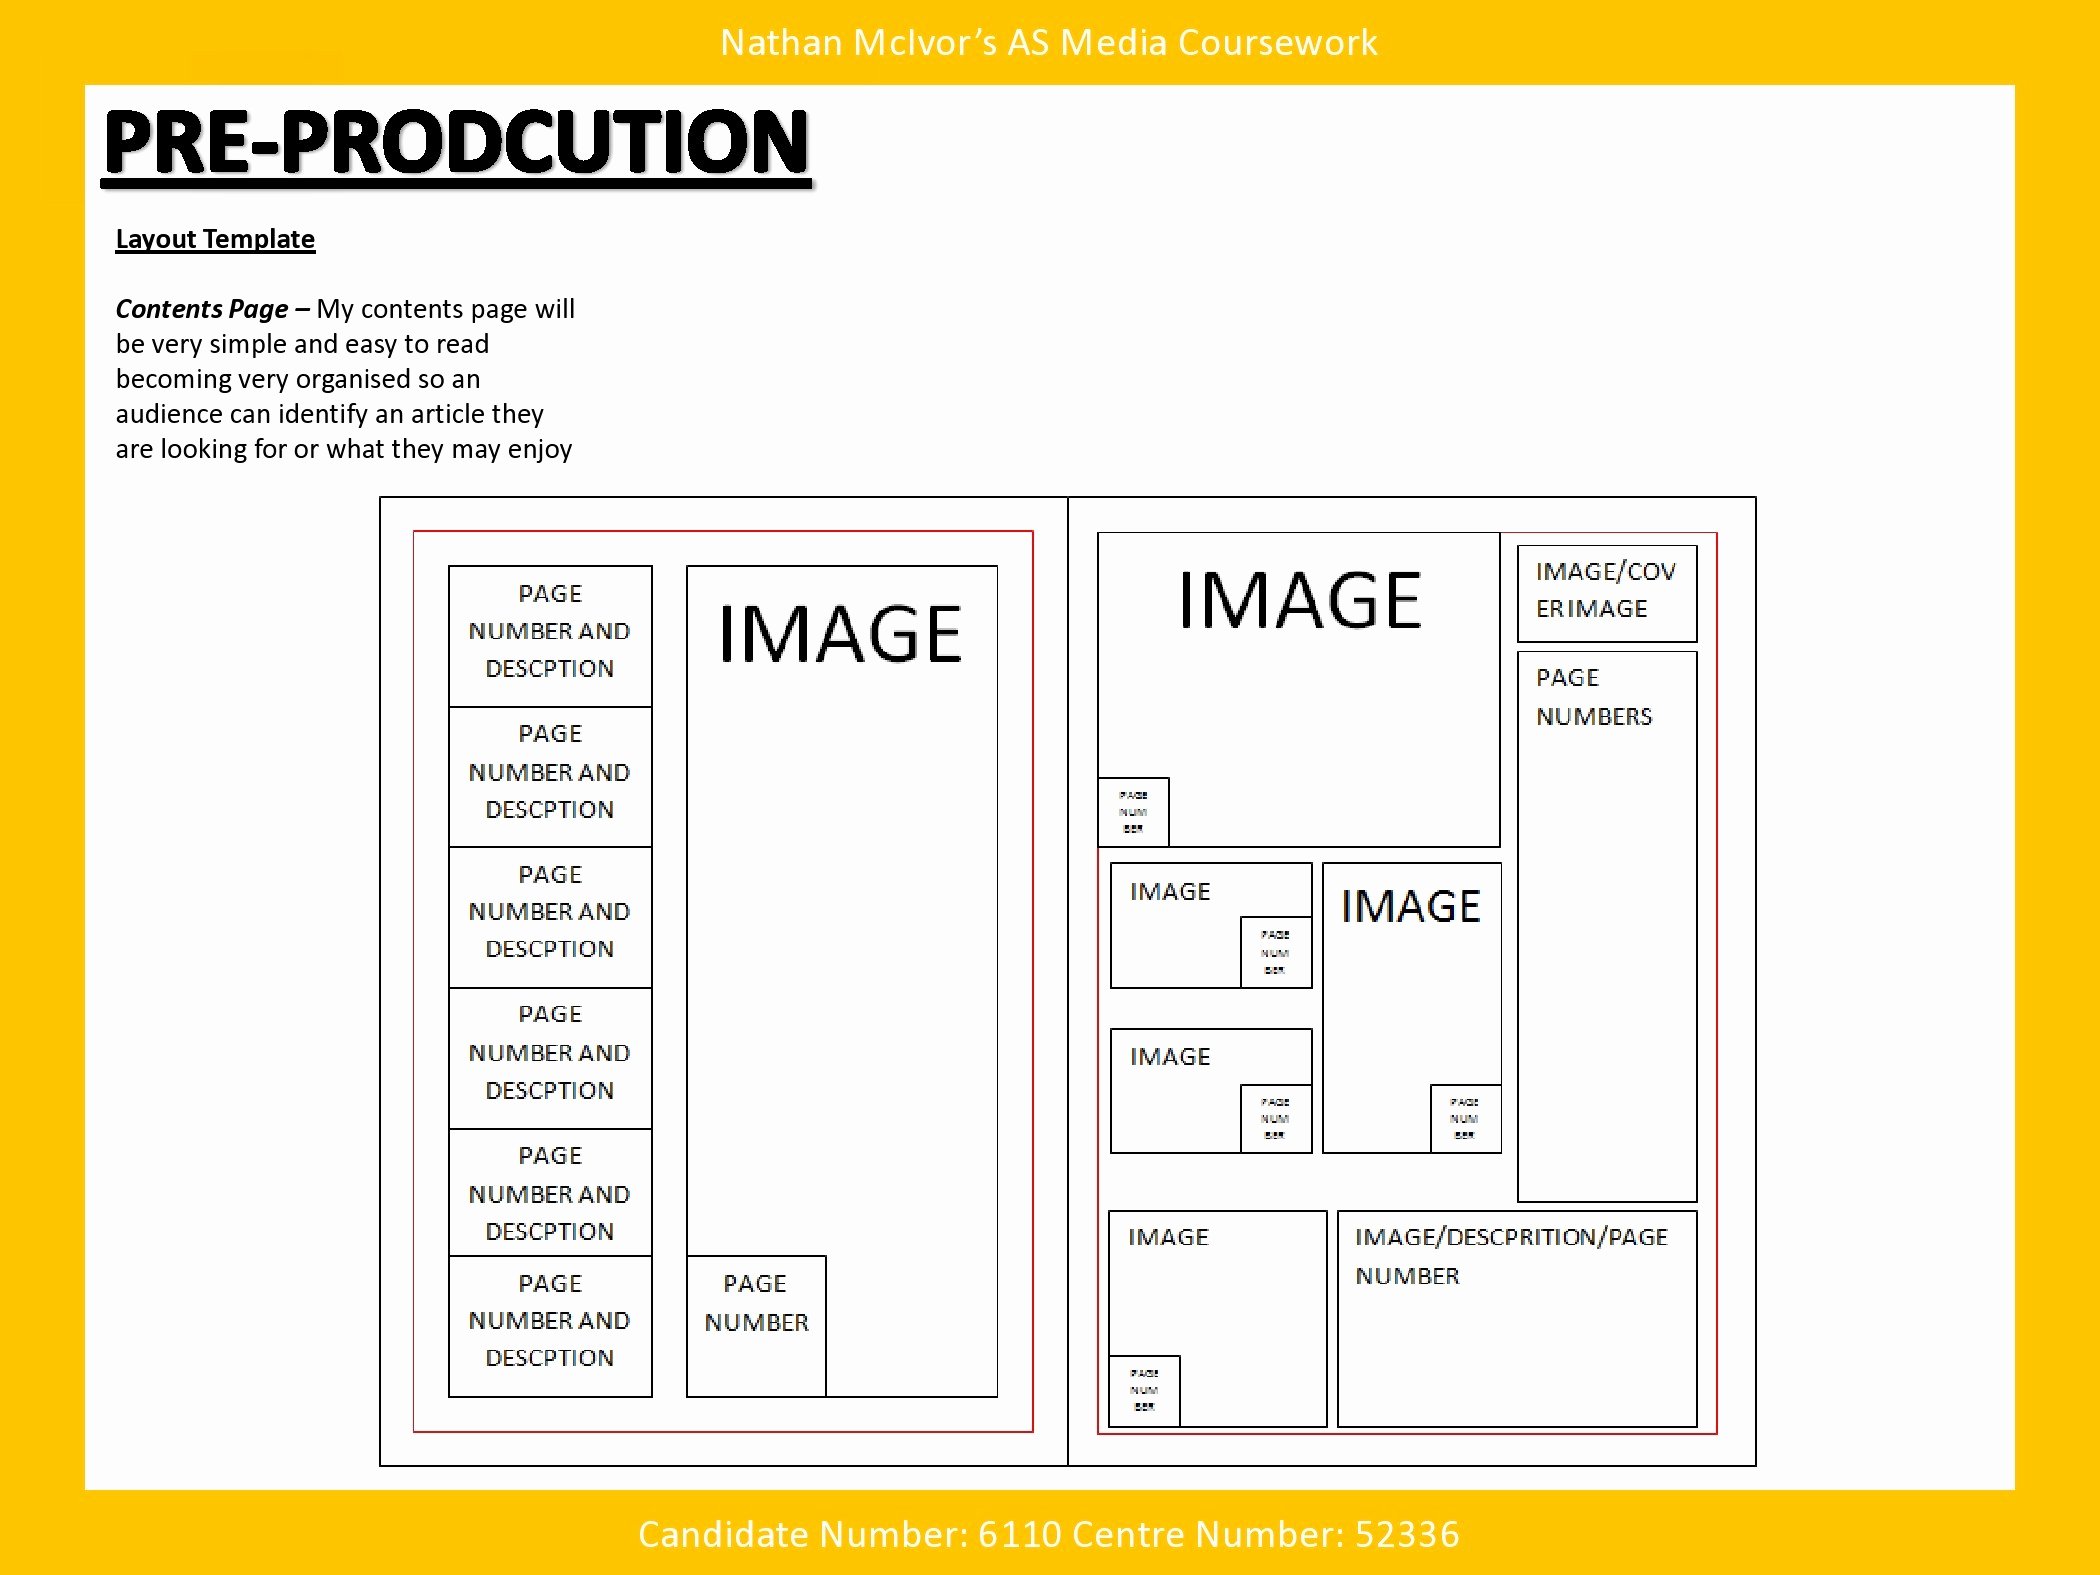 Playbill Template Free New Playbill Template In Microsoft Word Pdfeports585 Web